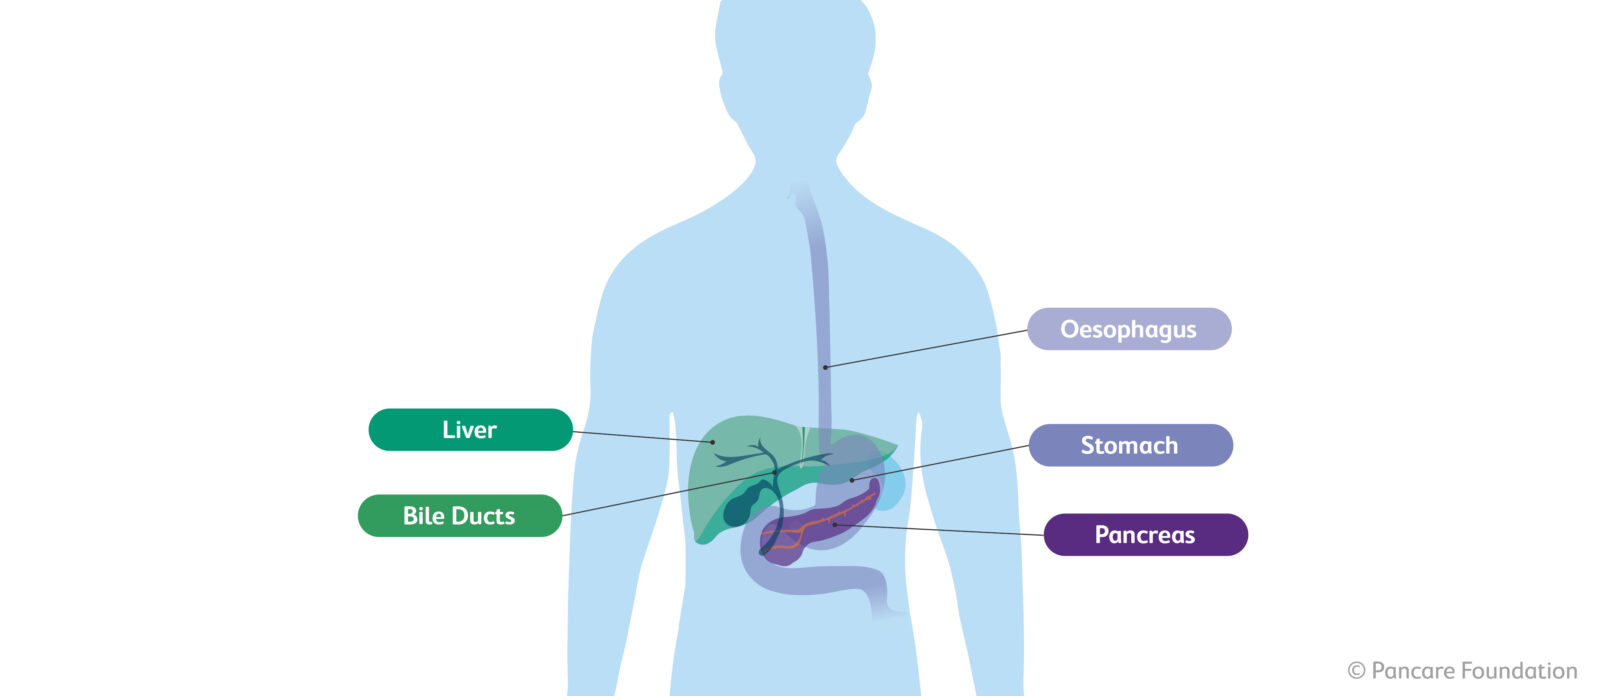 What is upper gastrointestinal cancer?